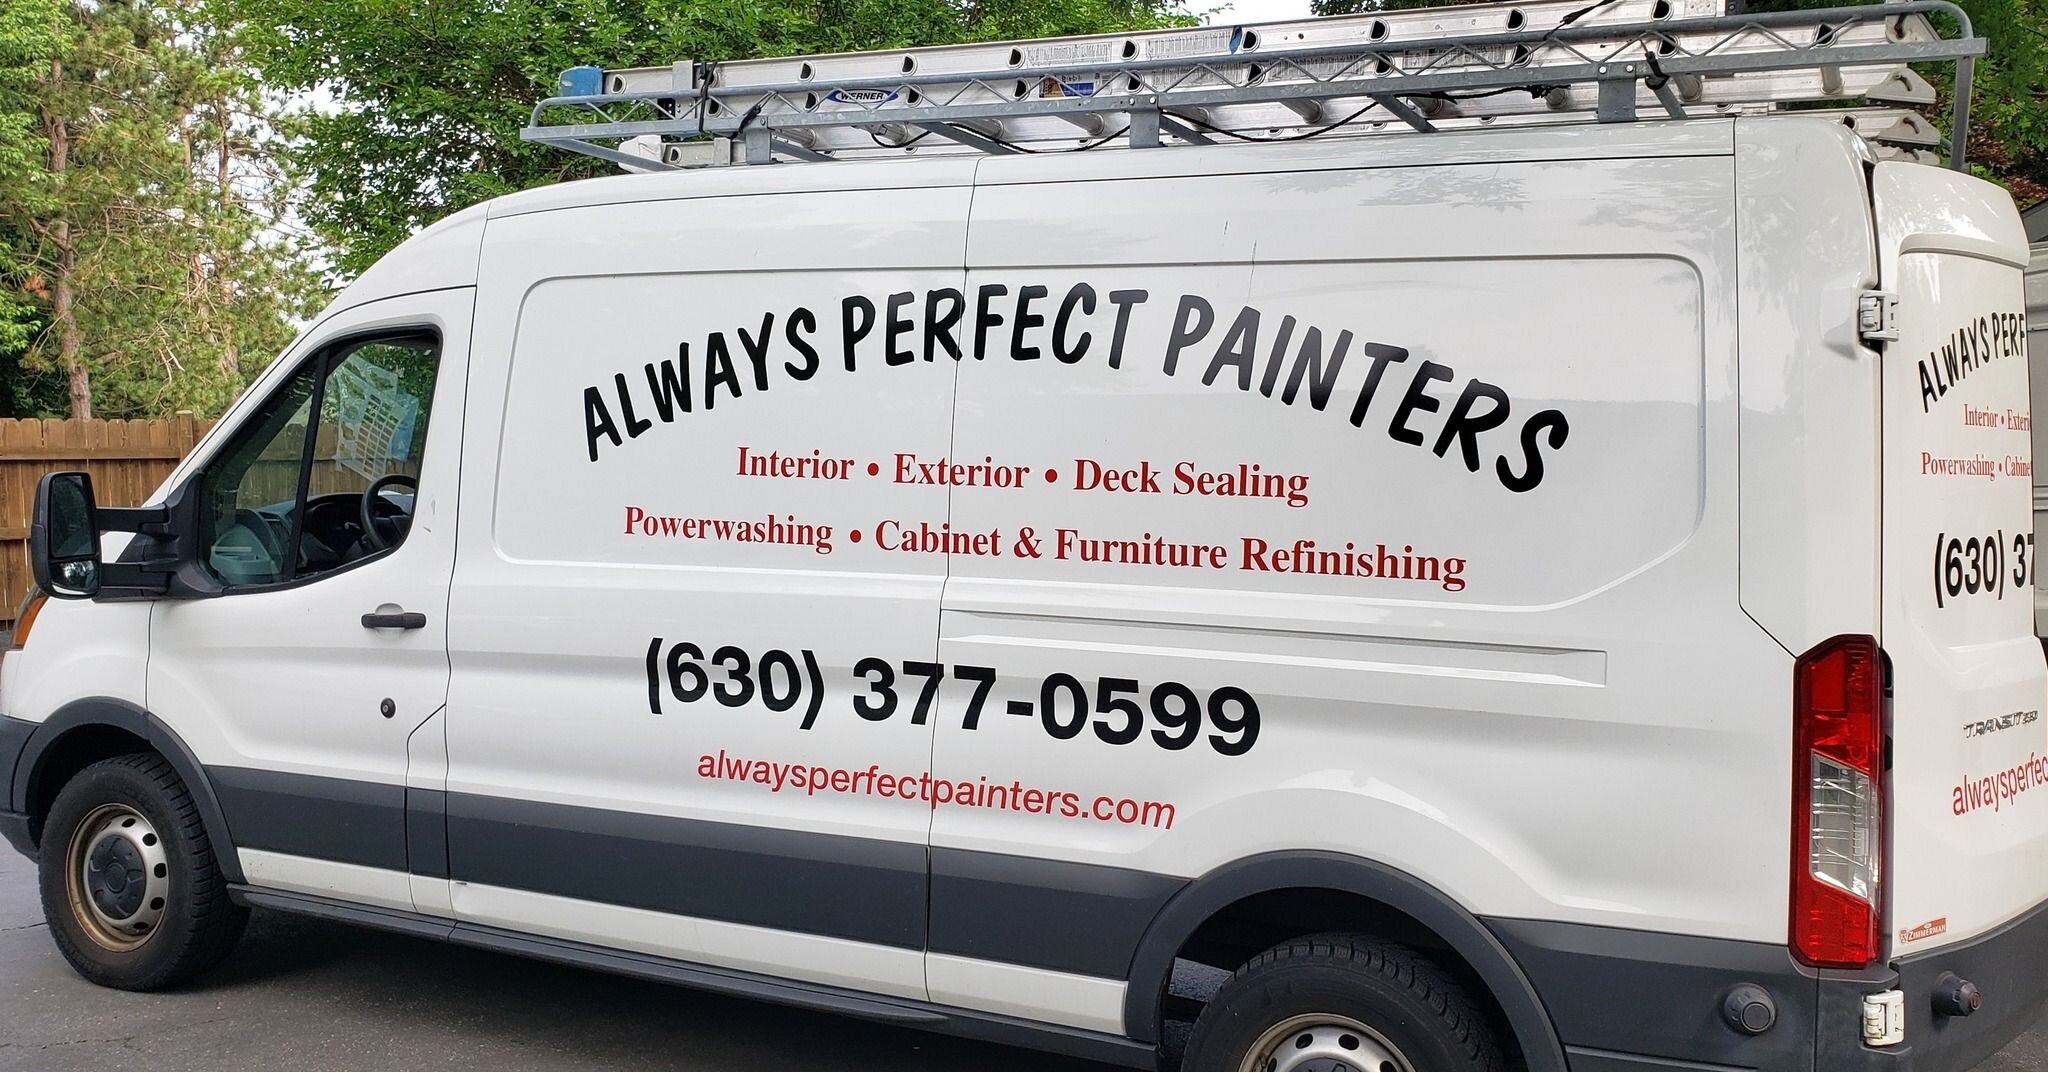 WE APPRECIATE THIS REVIEW FROM A LONG TIME CUSTOMER!
&quot;Ryan and his team are always professional, respectful of our home environment, and simply put- do beautiful work. We are on our 2nd house that's been painted by Always Perfect Painters and wo